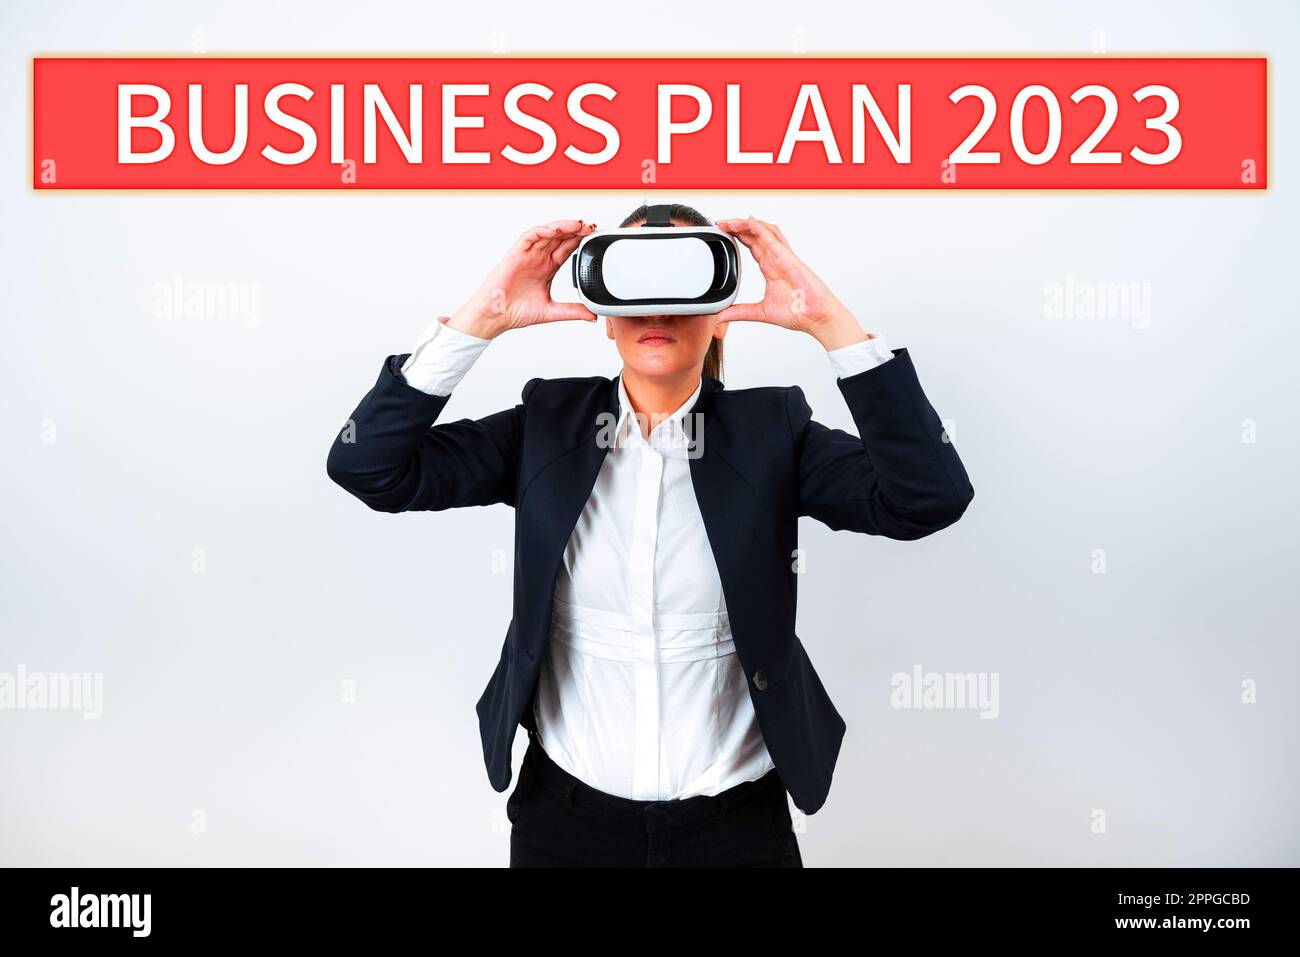 Writing displaying text Business Plan 2023. Concept meaning Challenging Business Ideas and Goals for New Year Stock Photo